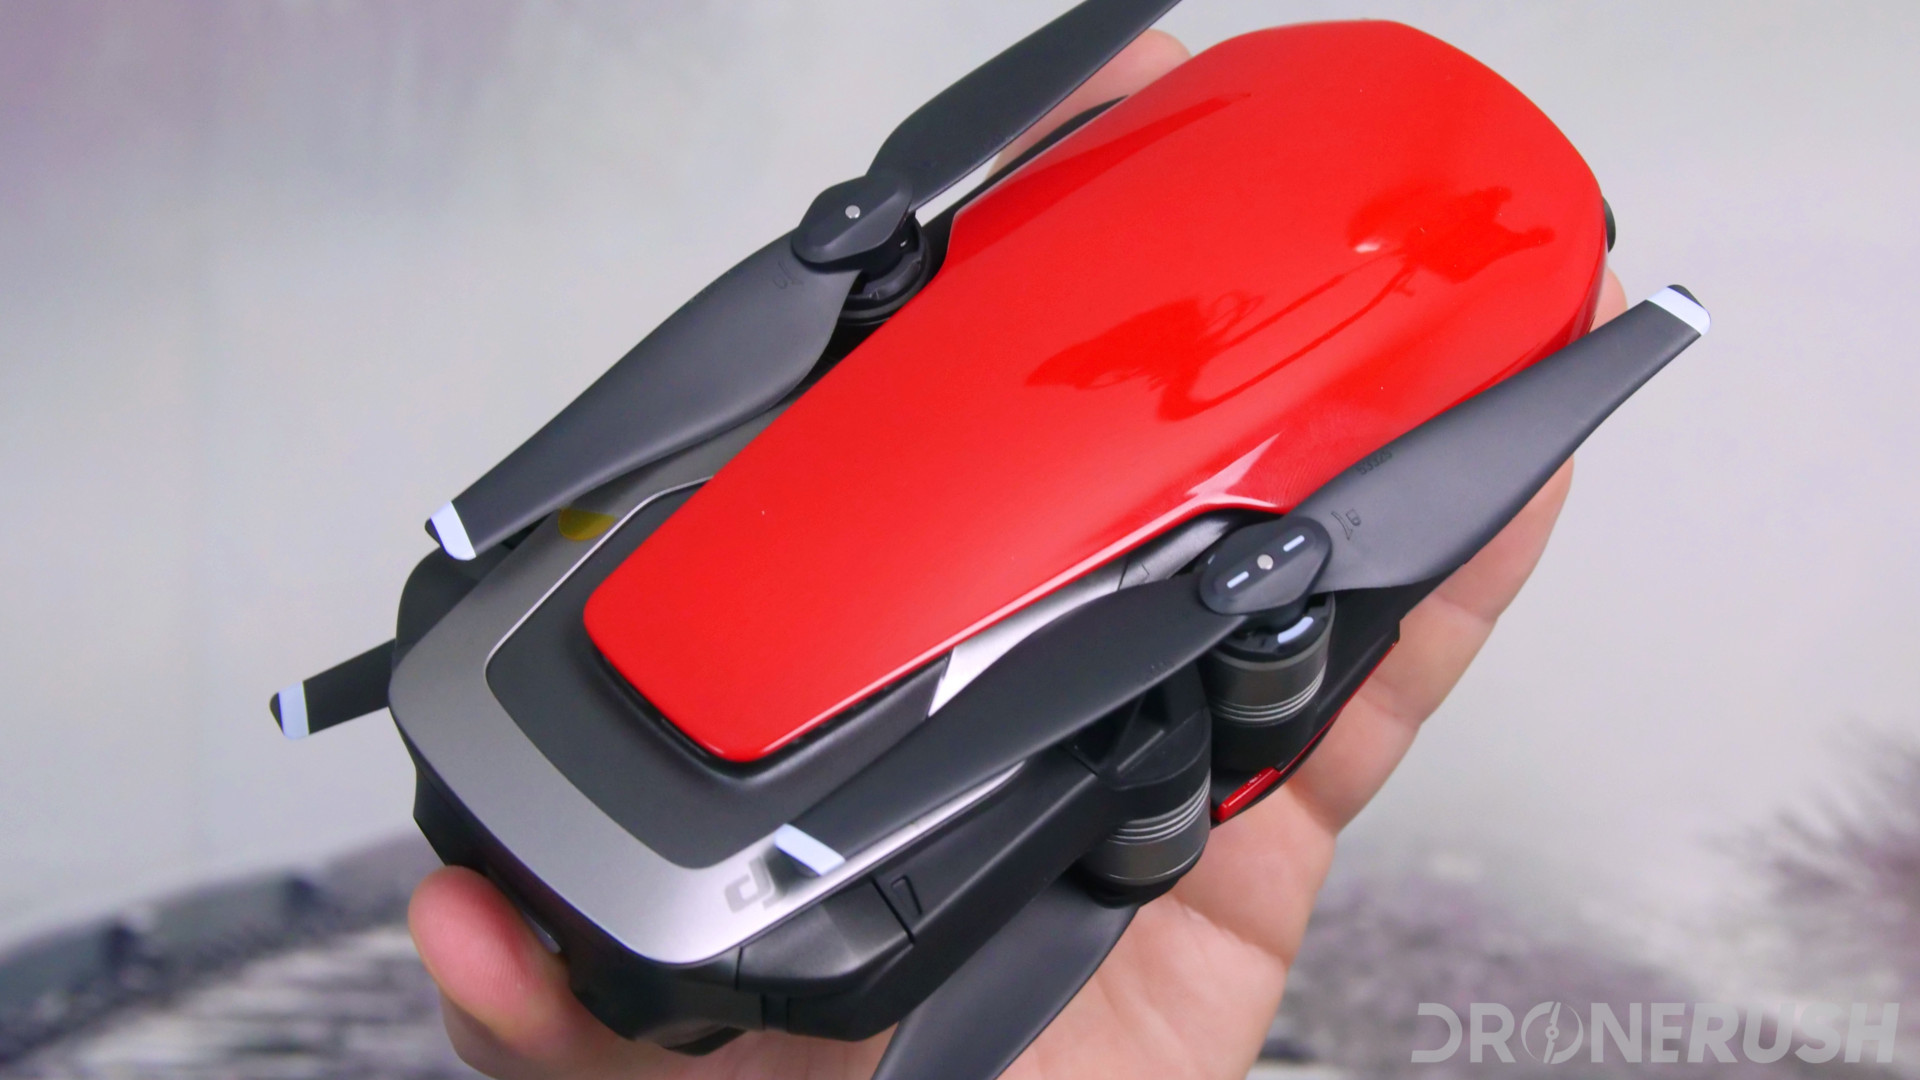 Image of a red DJI Mavic Air folded and held in hand. Let's talk about things to do with your DJI Mavic Air.